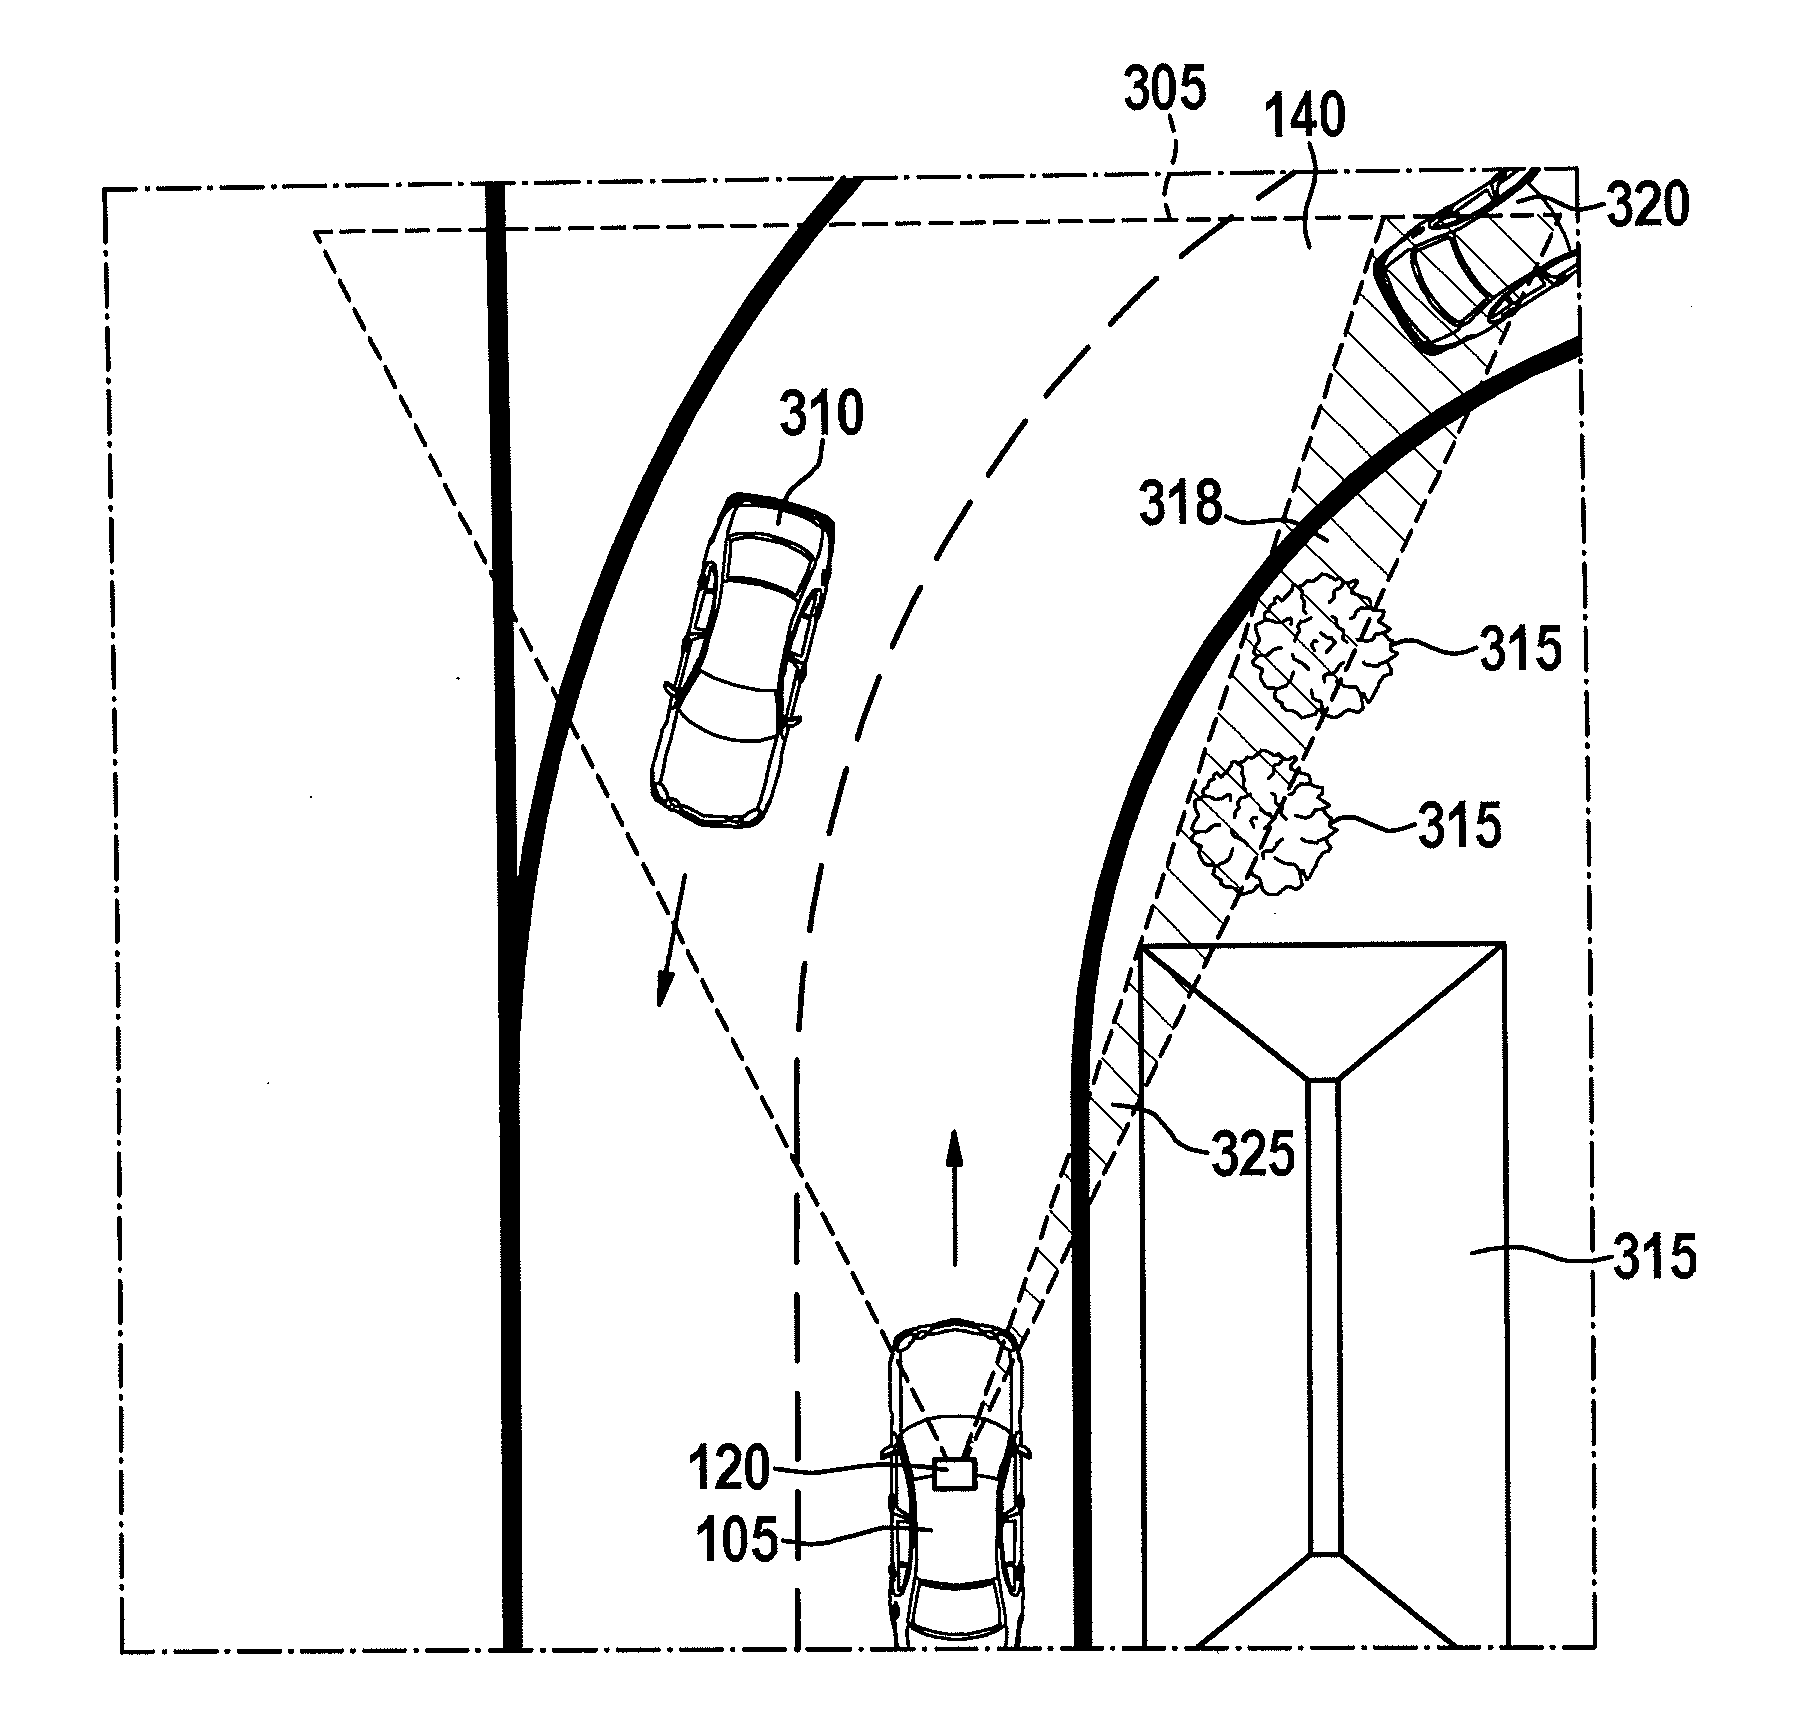 Speed assistant for a motor vehicle